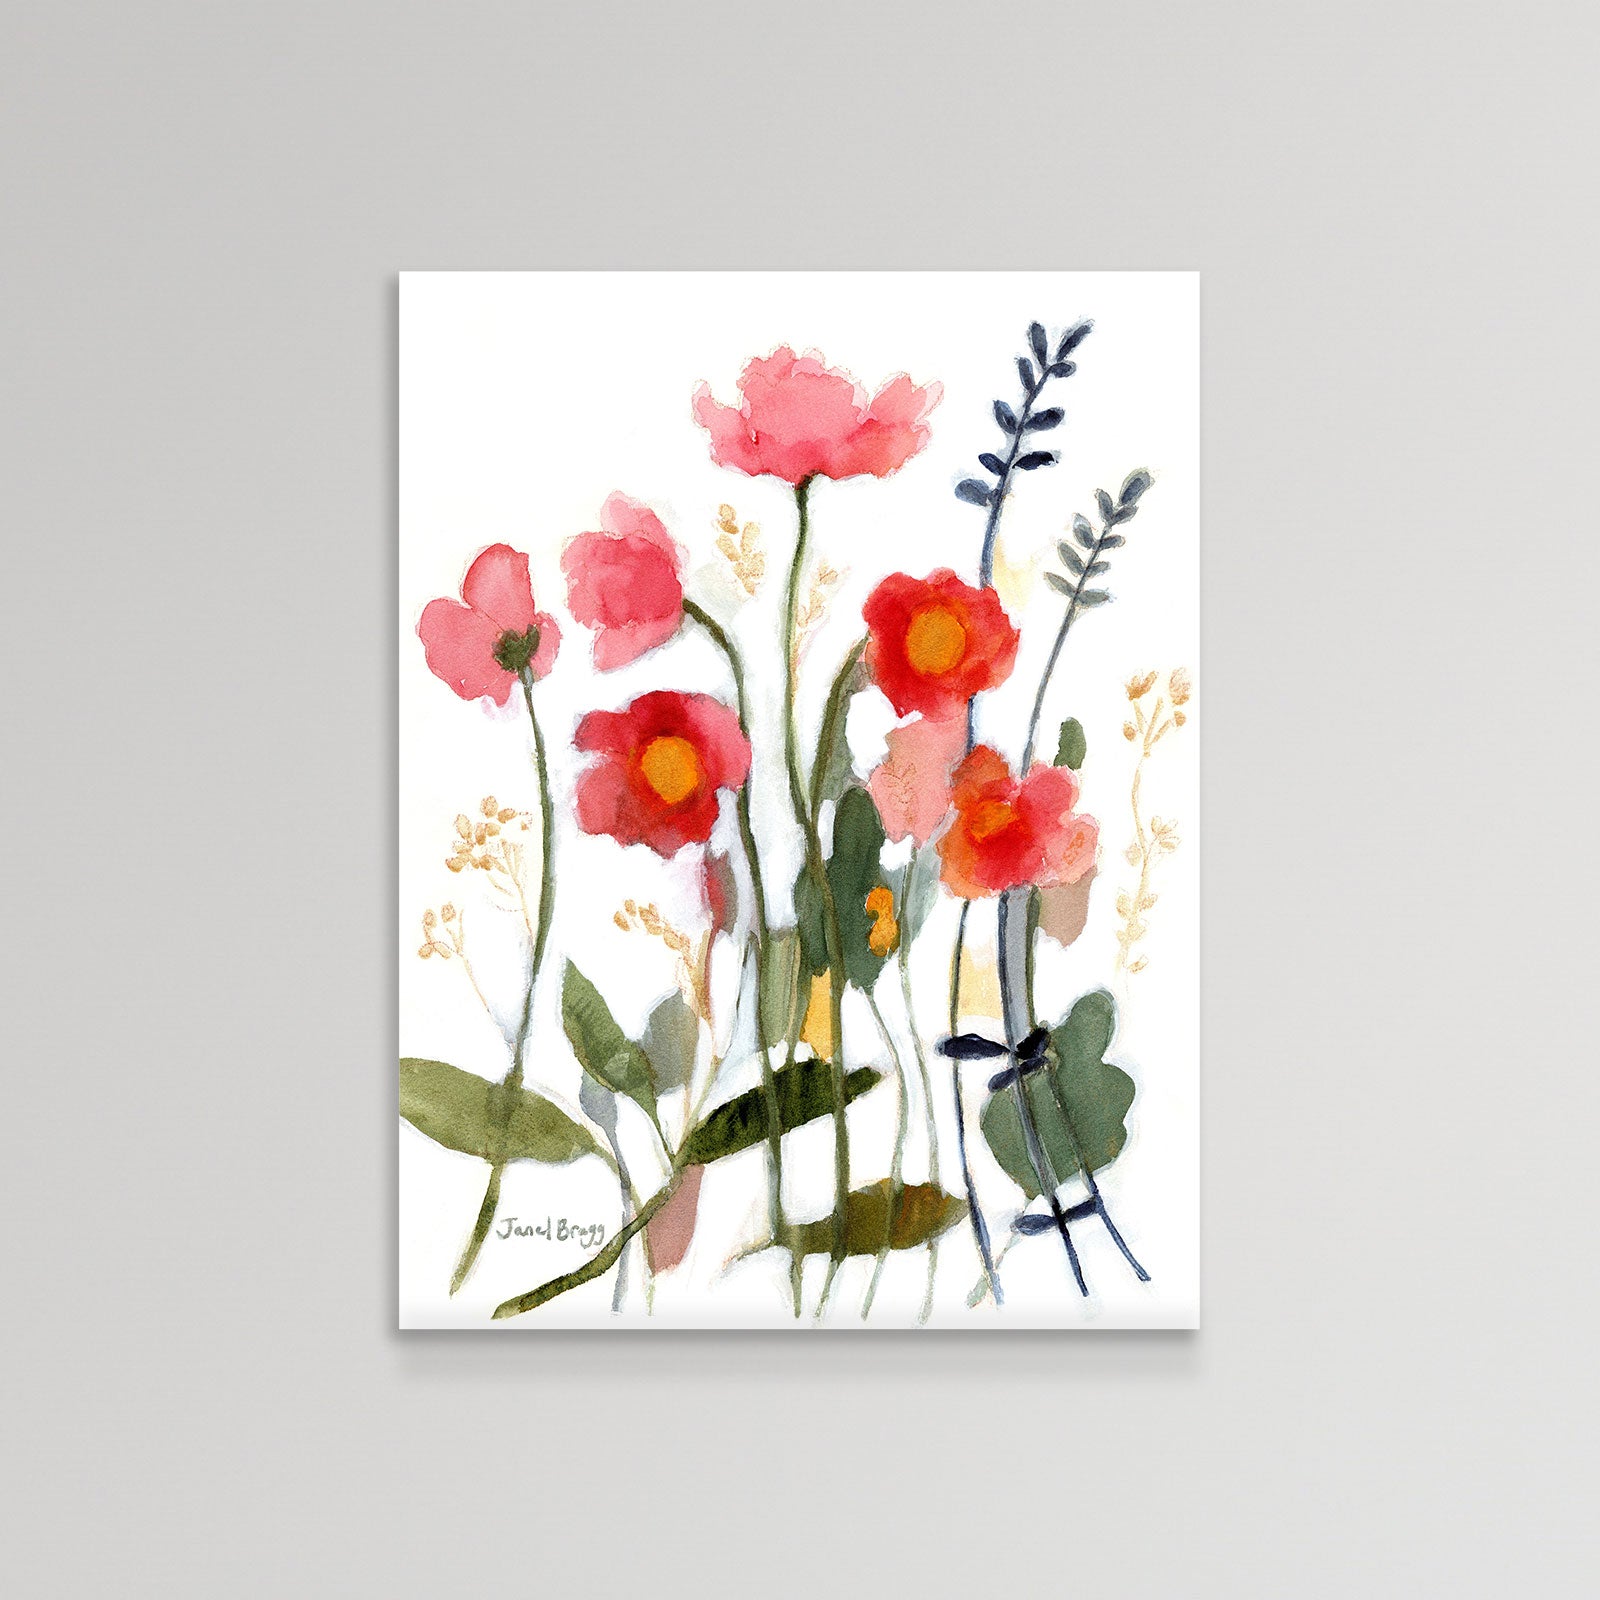 Floral with Wild Roses No. 2